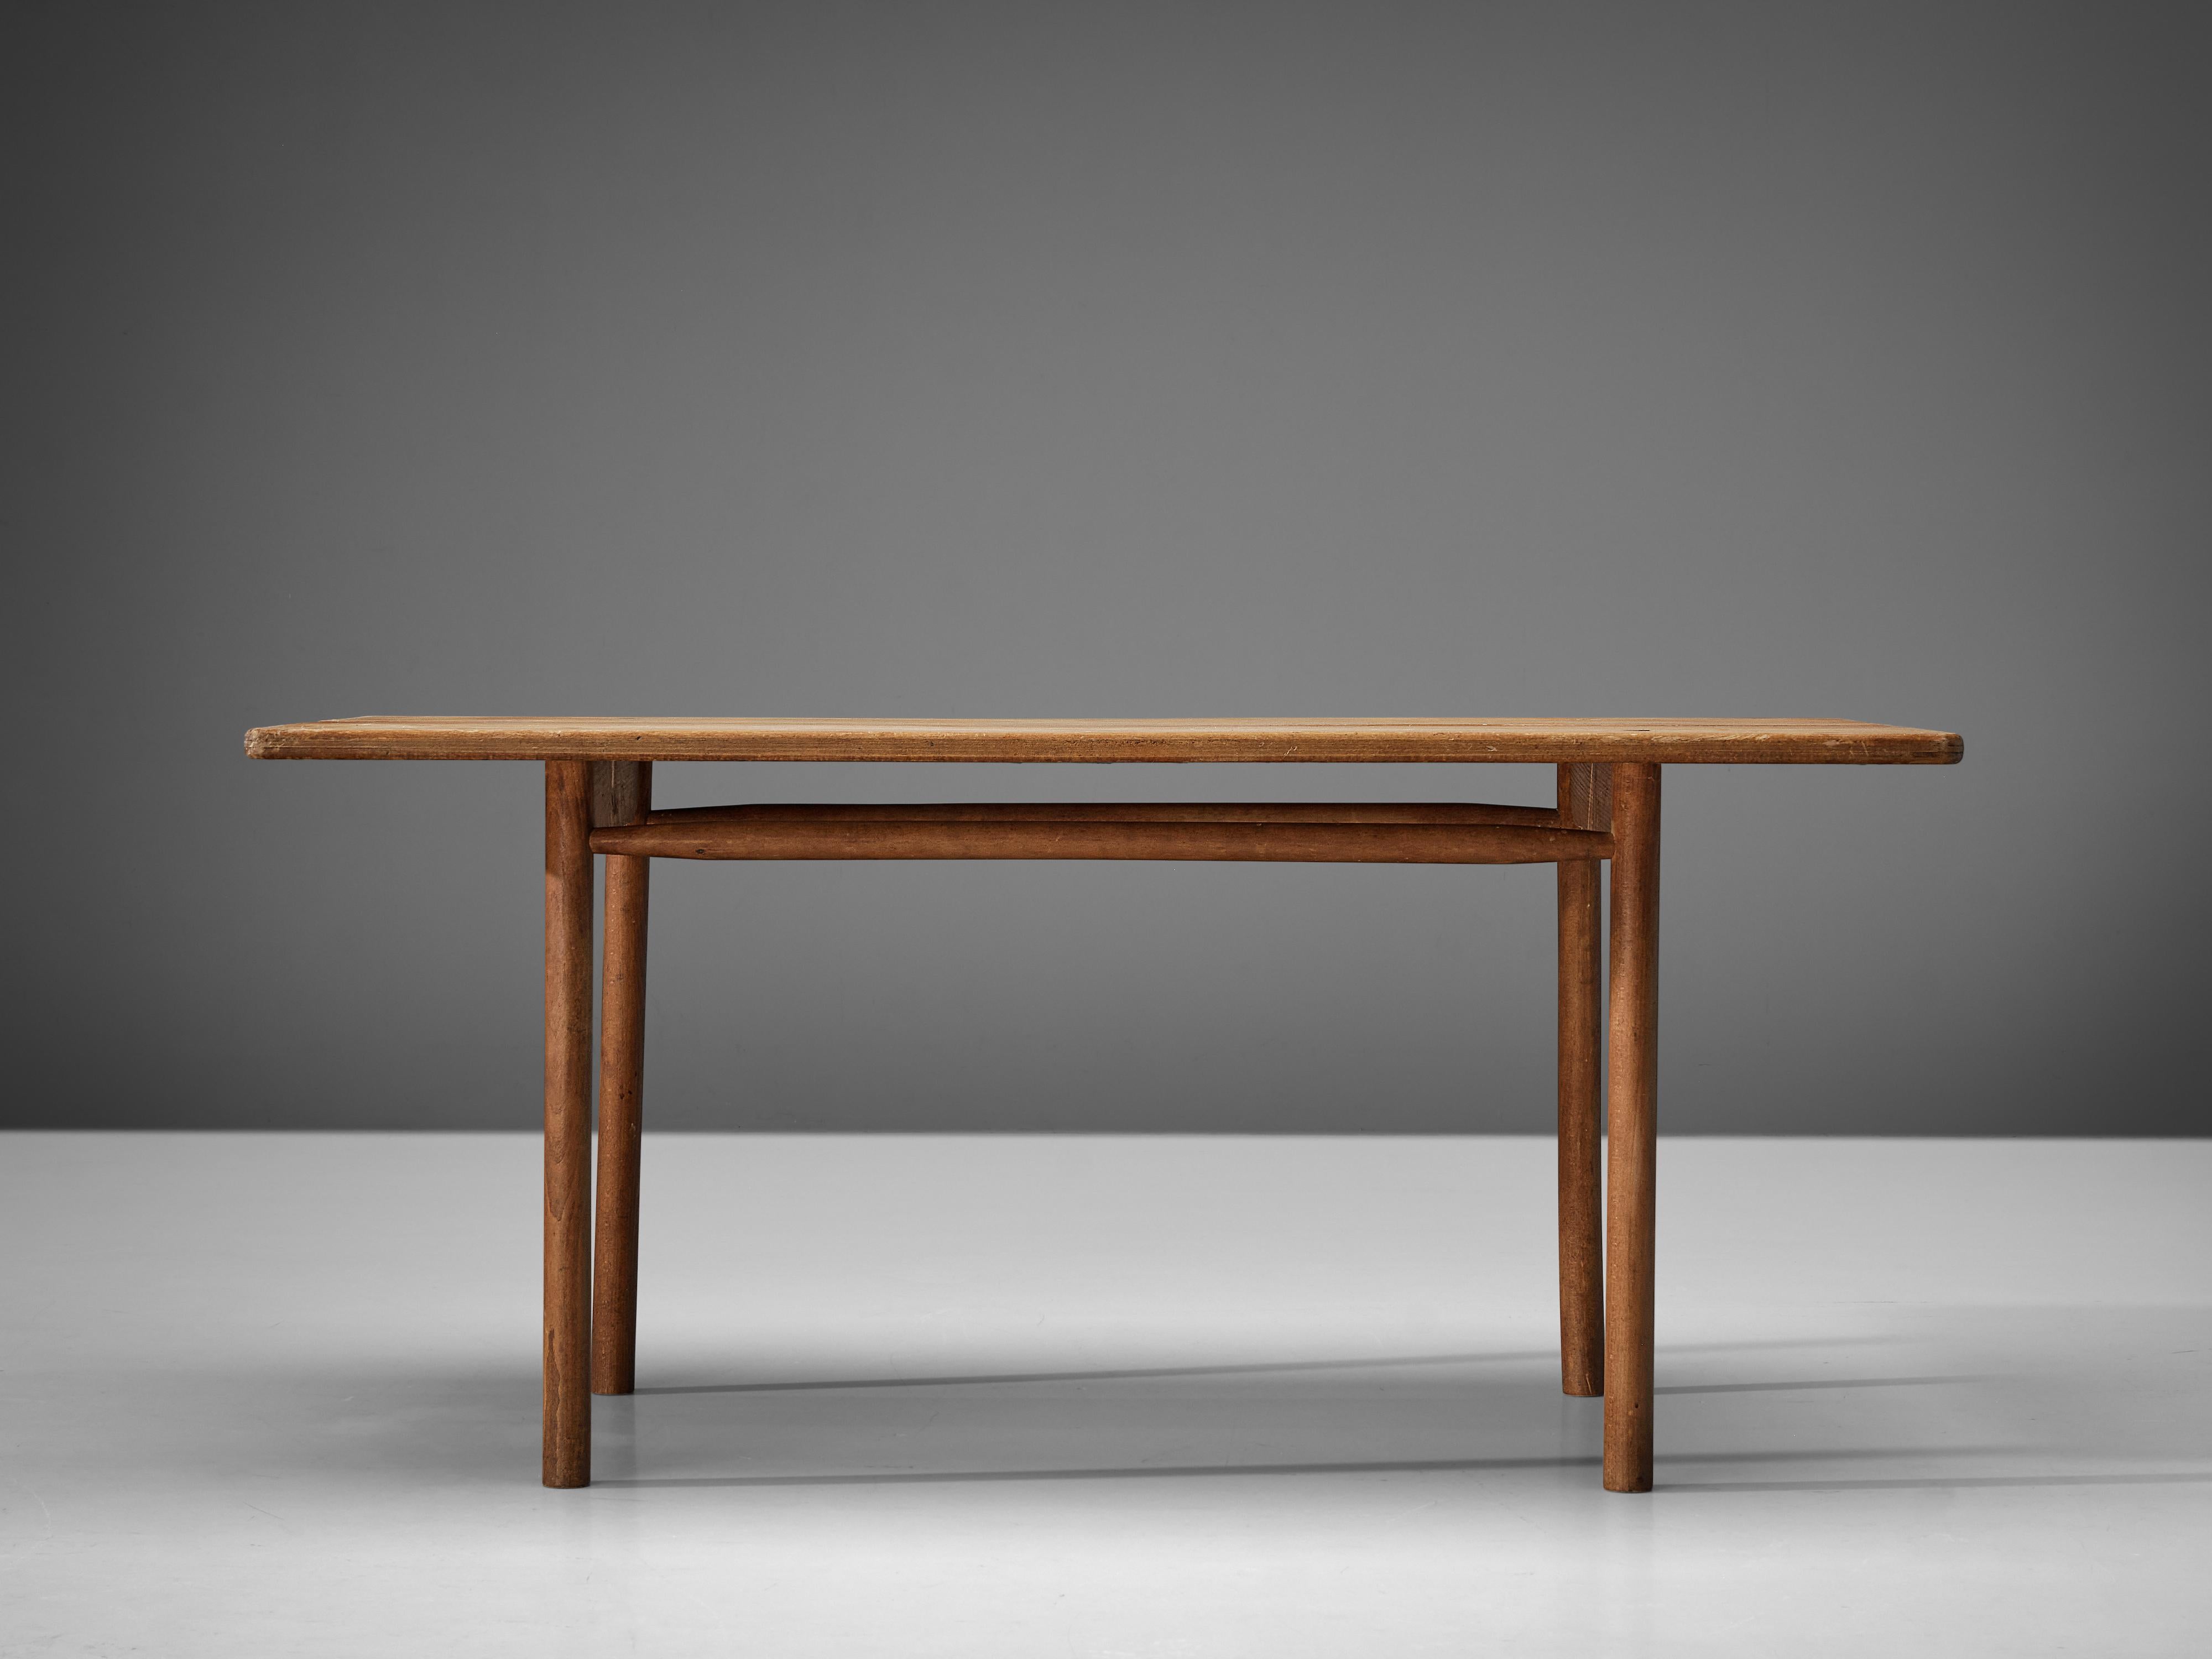 Pierre Gautier-Delaye, table, solid beech, France, 1950s

Simplistic table by French designer Pierre Gautier-Delaye. The sleek design shows a beautiful line, which is emphasized by the open space in the middle of the table. Moreover, the quality of